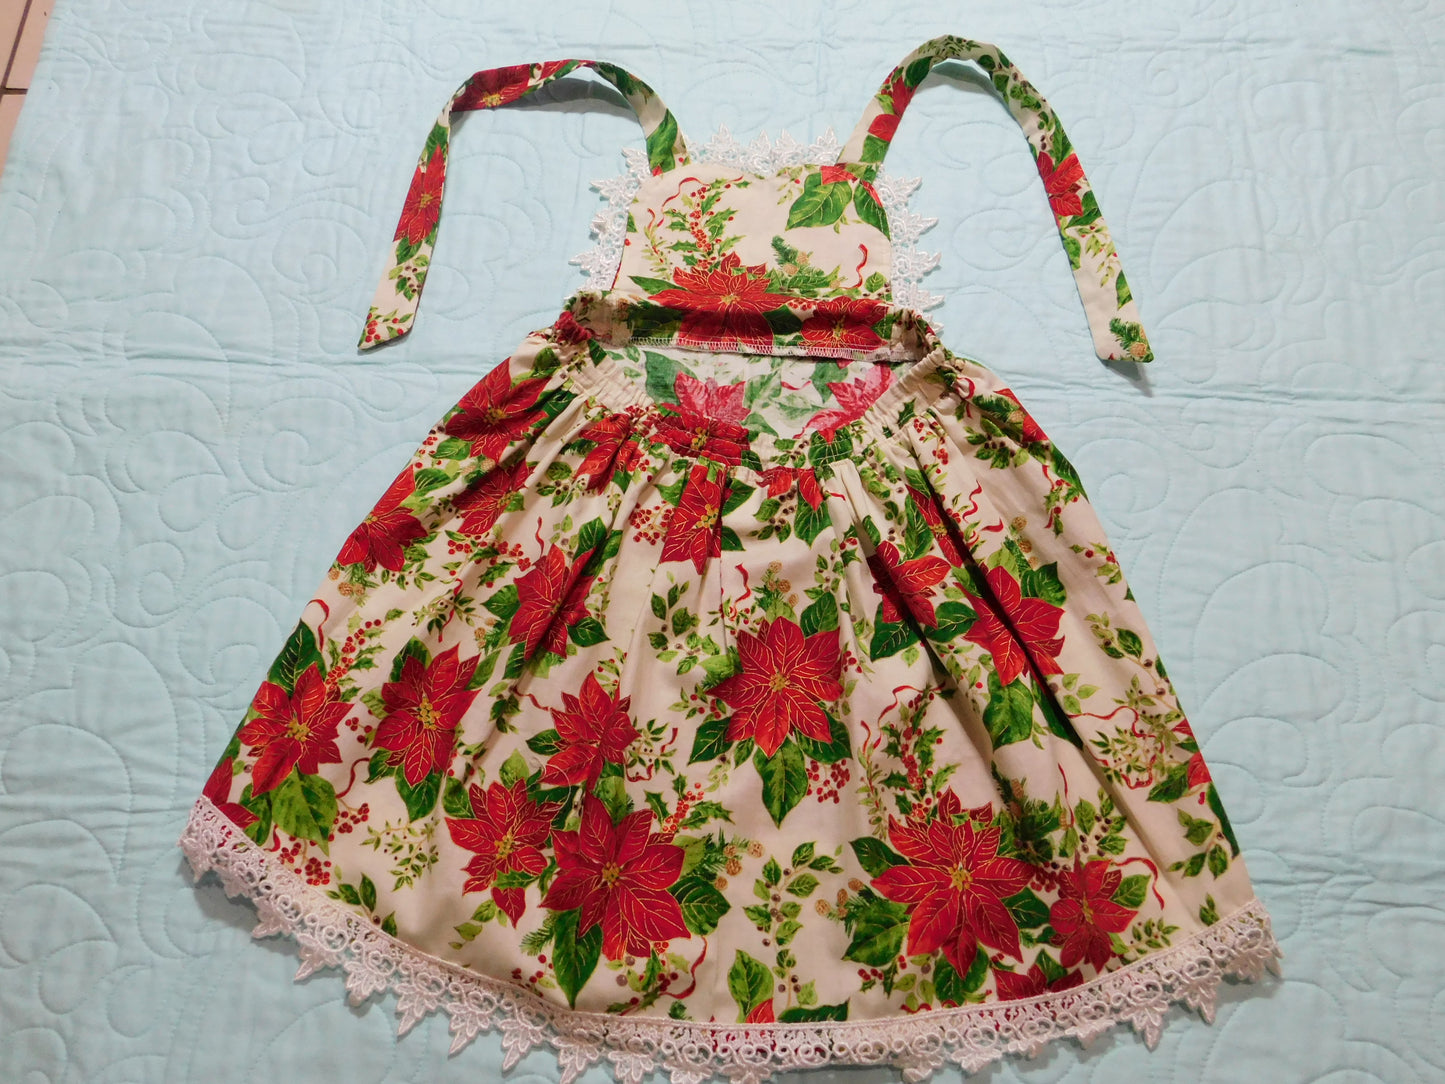 2 Piece Set - Dress and Nappy Cover - Christmas - Pinafore with Australiana Red & Gold Poinsettias & Nappy Cover with White Lace Trims